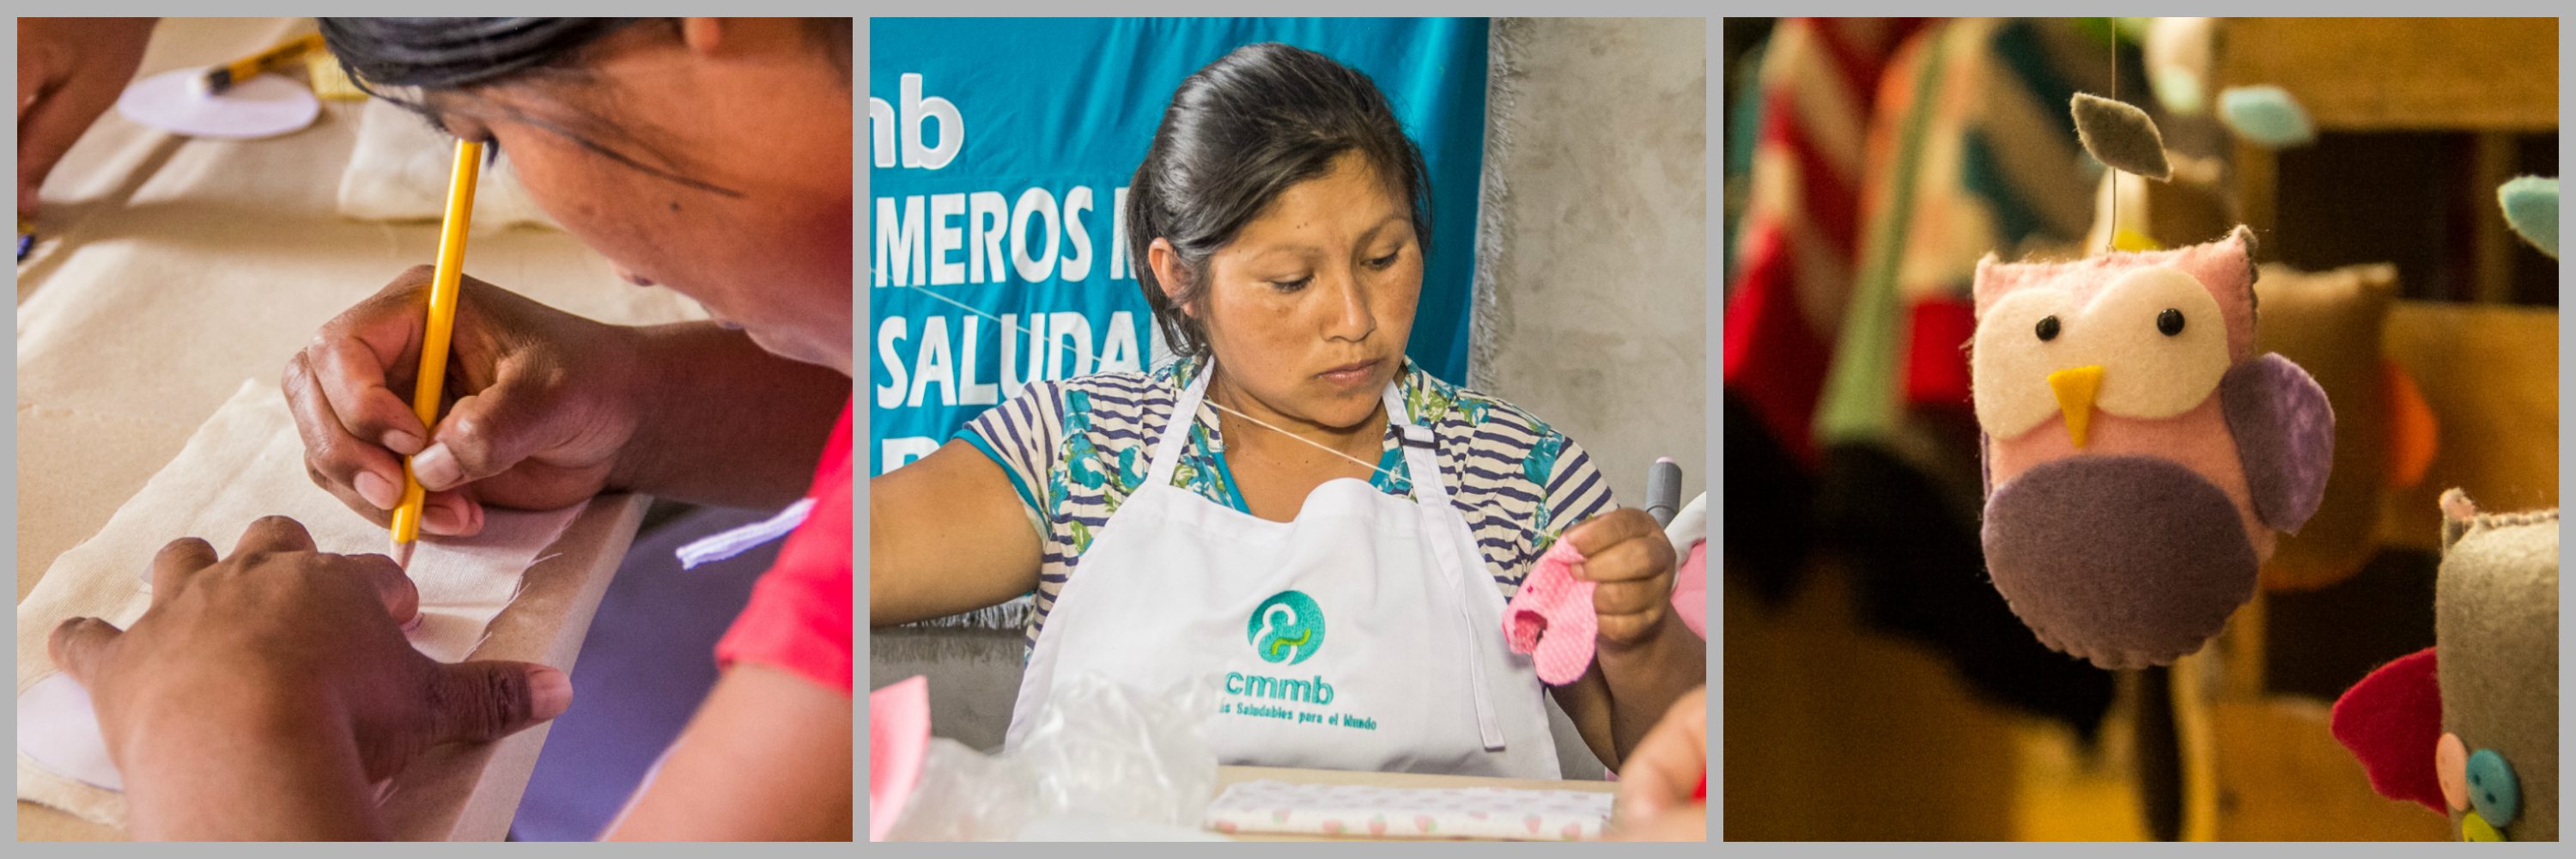 From design to finish economic empowerment in Peru